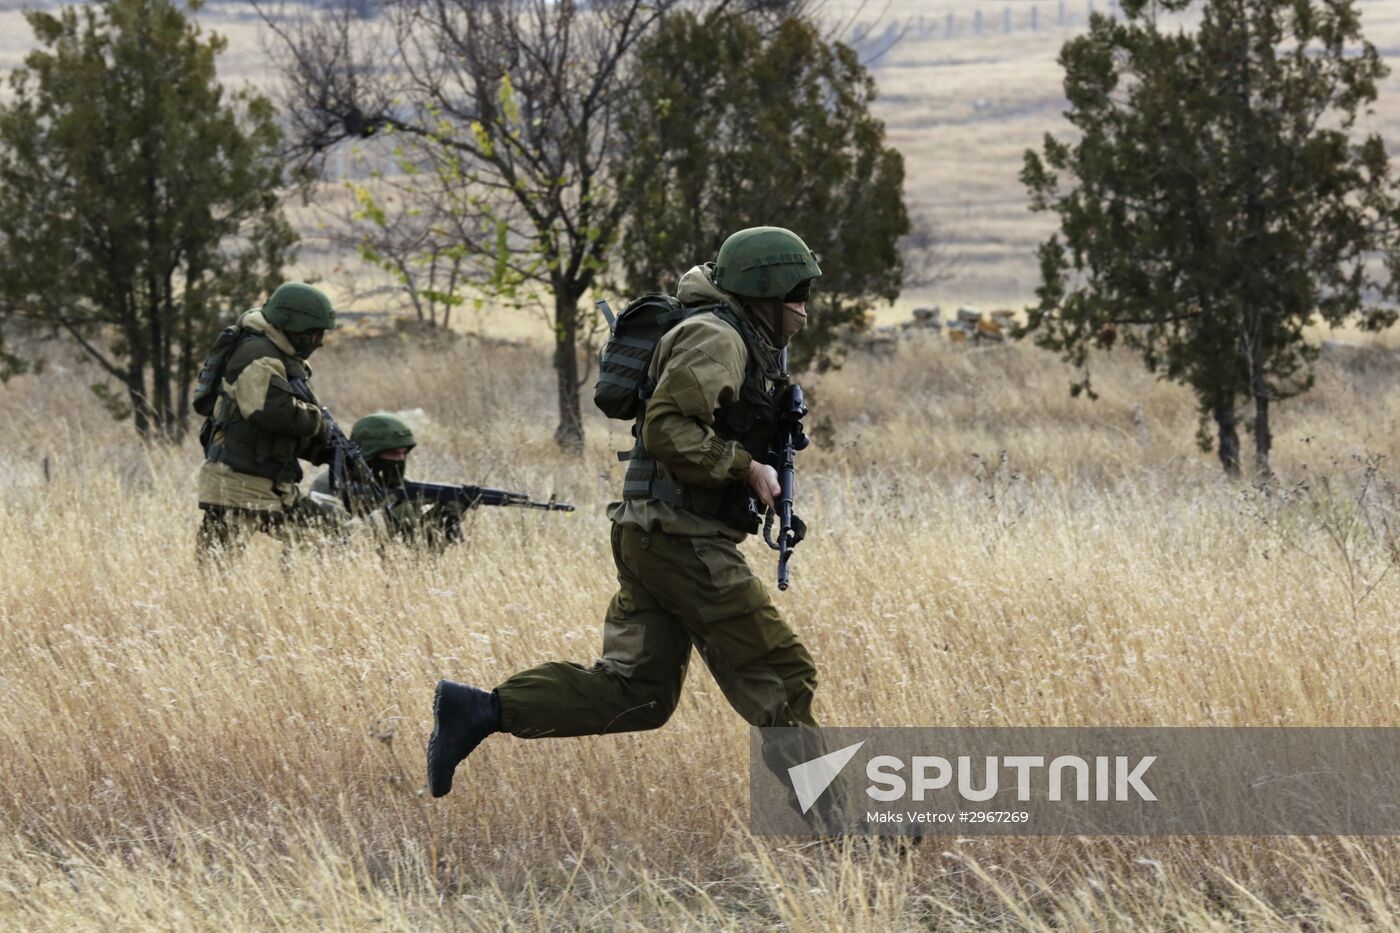 Exhibition performance of border guards in Crimea